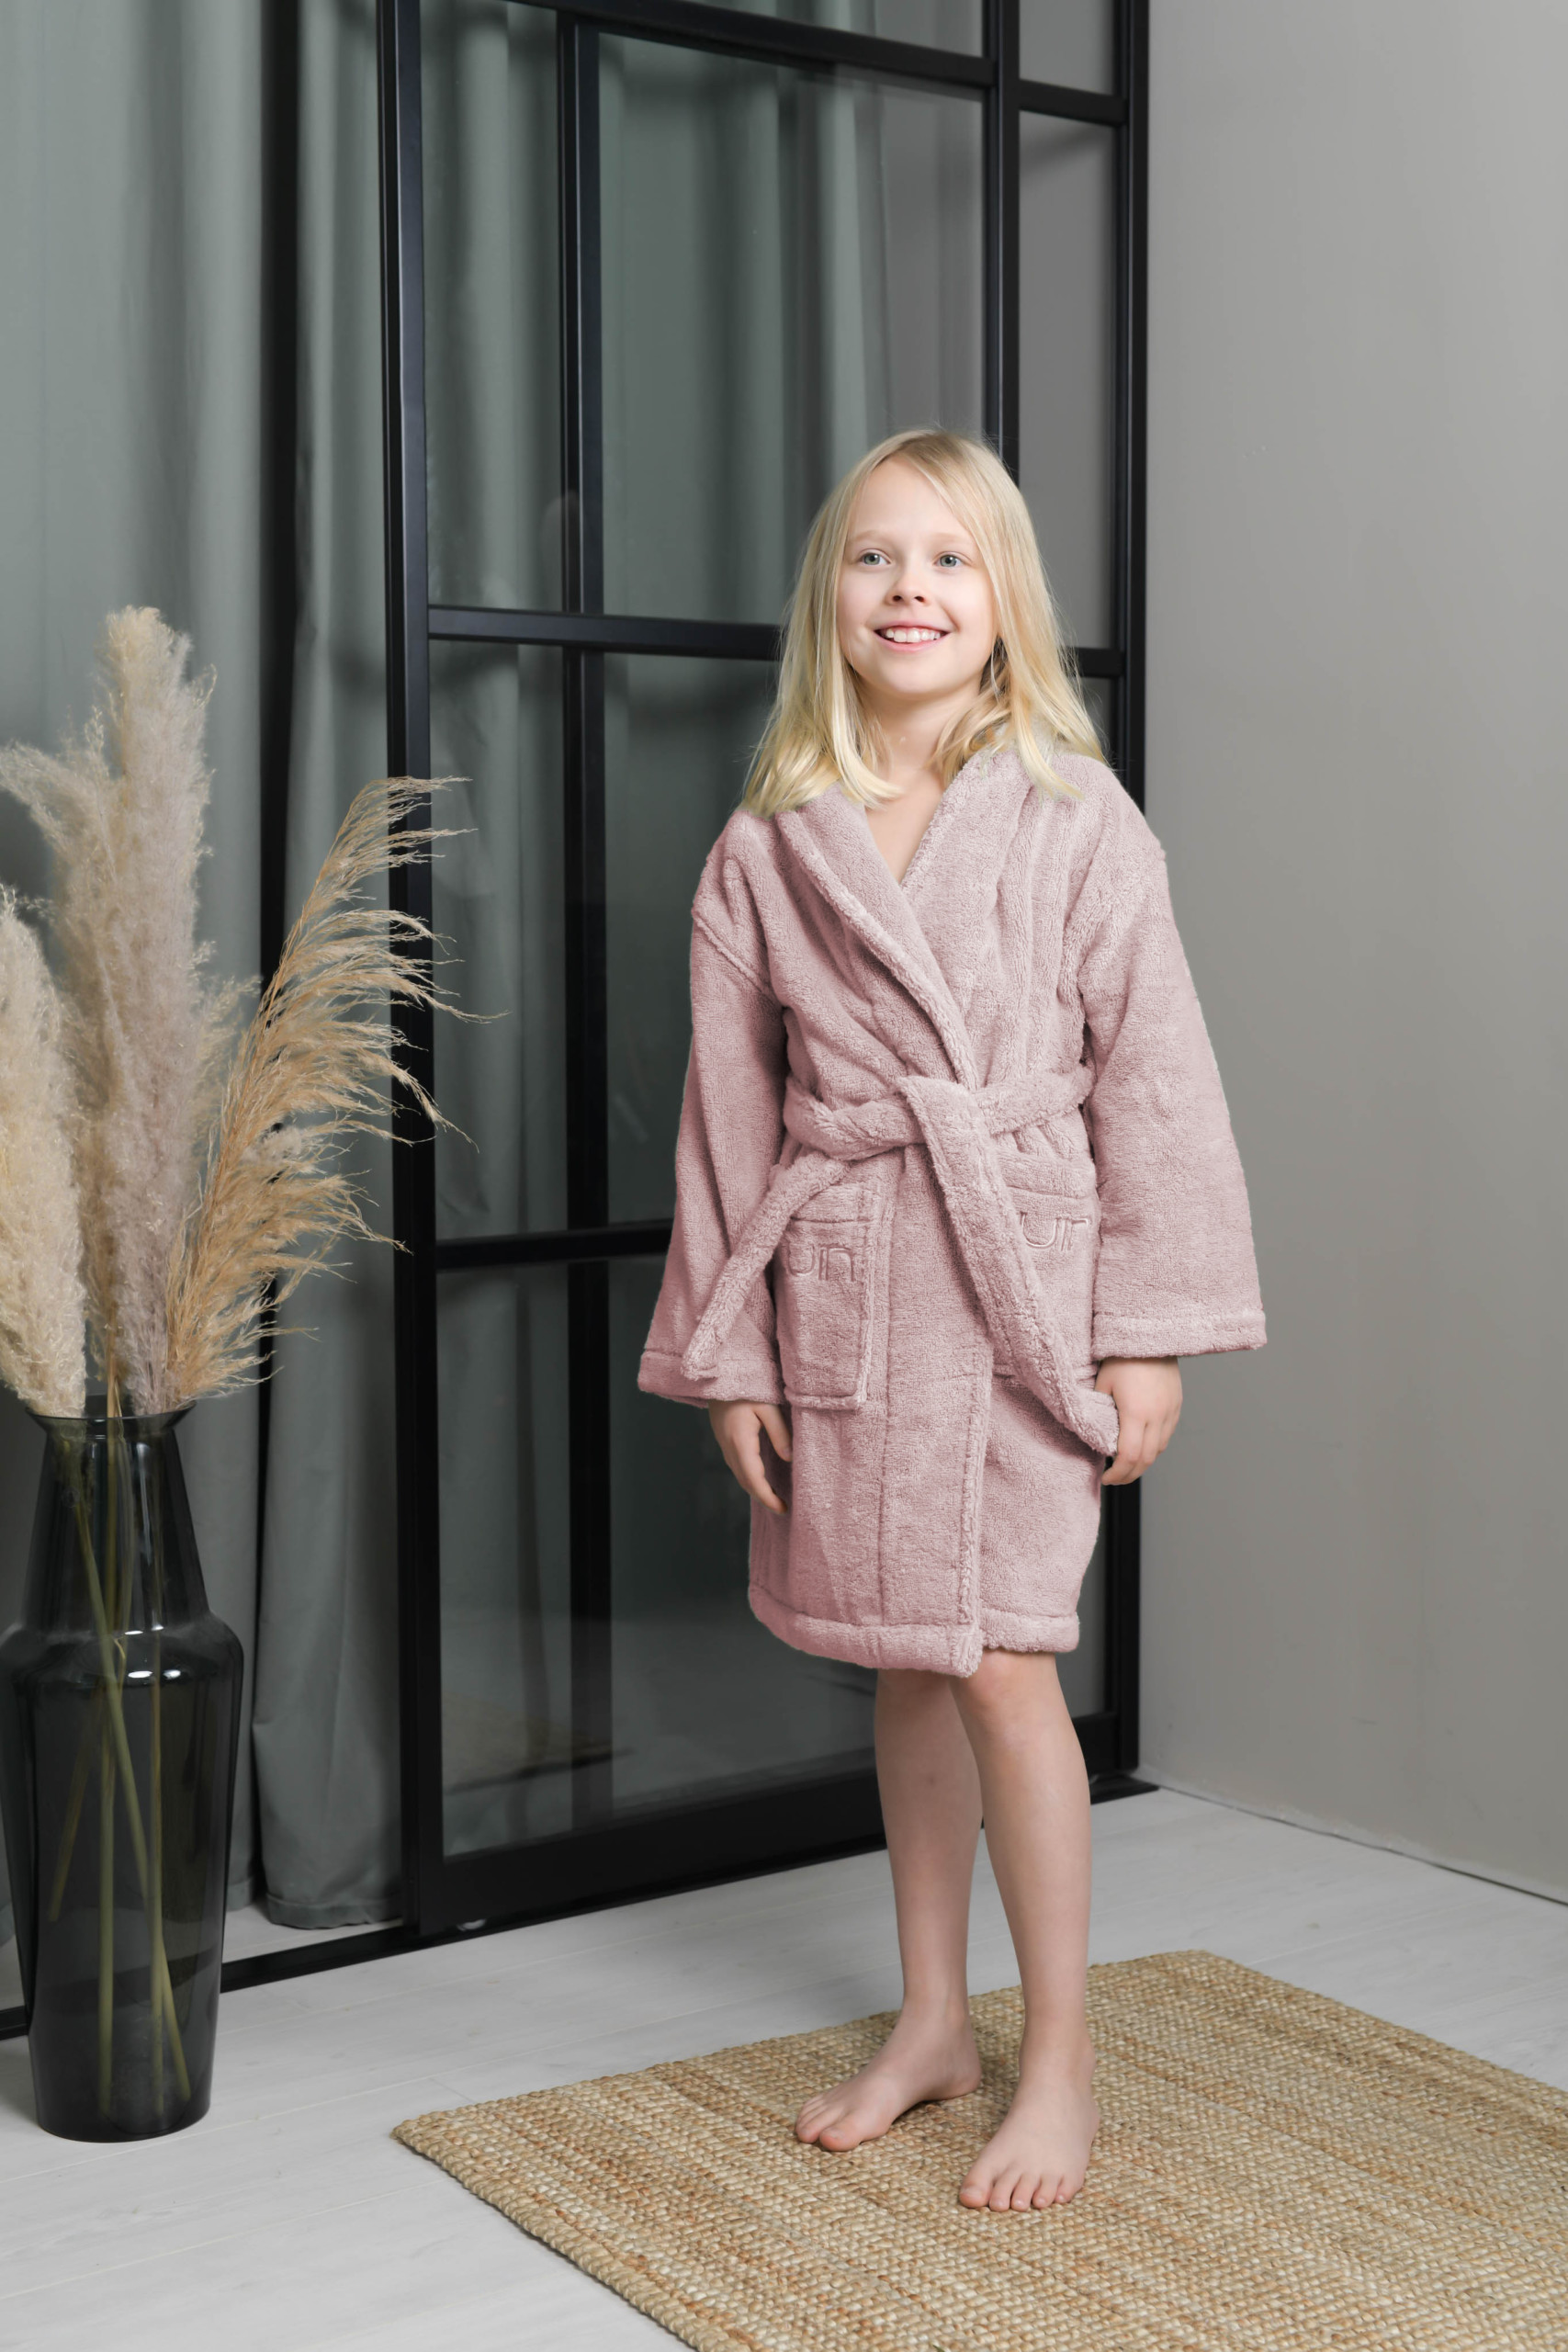 Do Yourself a Favor and Buy This Bathrobe, It's Perfect - Racked